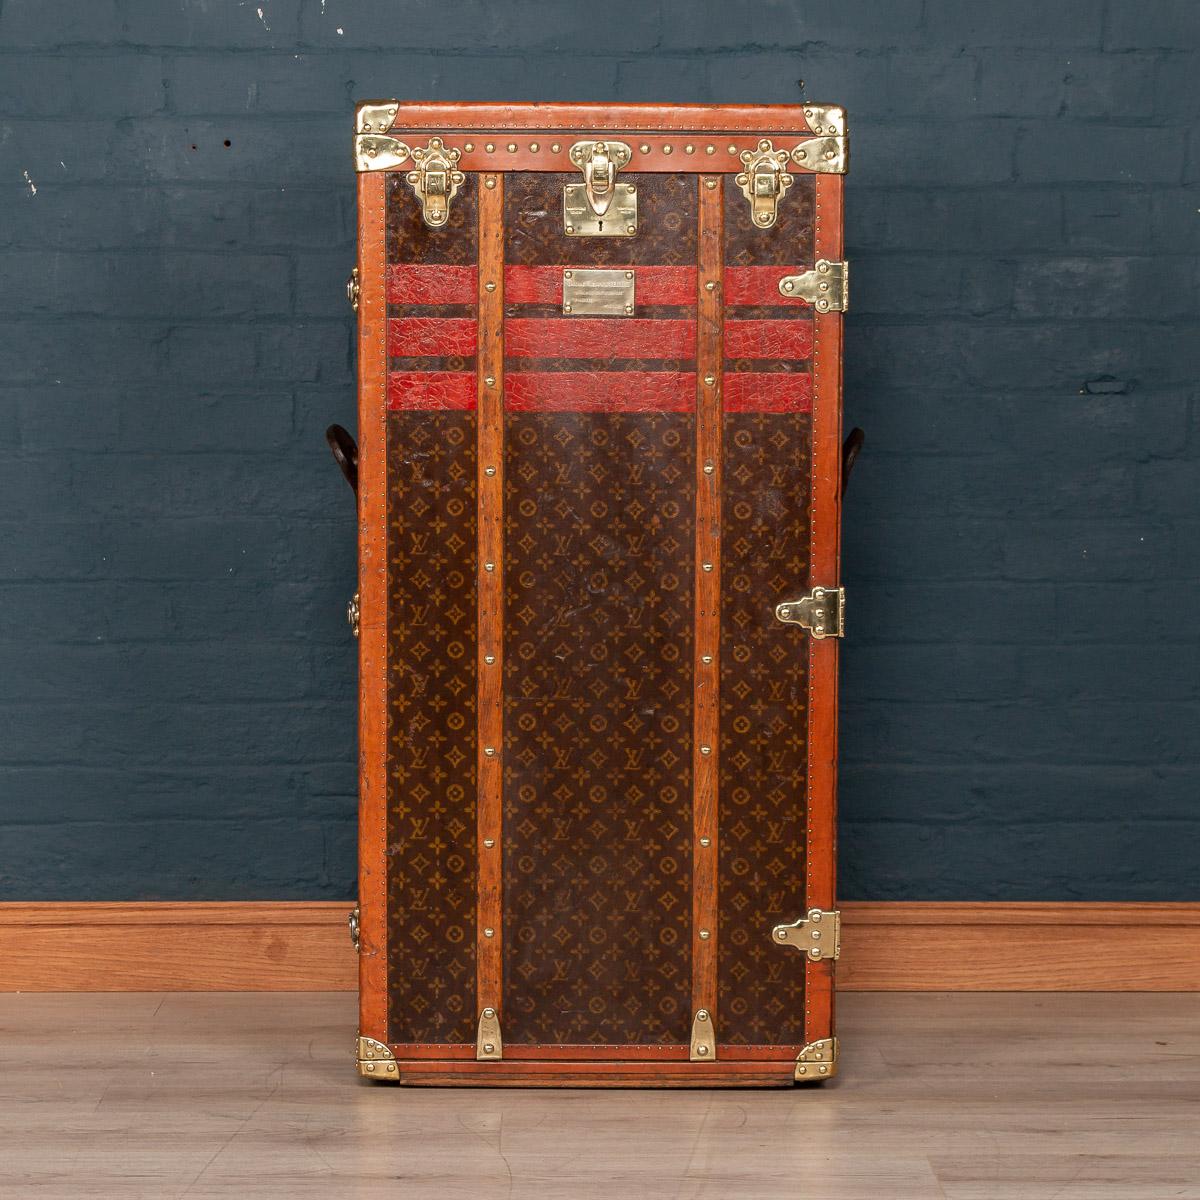 One of the rarest of Louis Vuitton trunks in circulation is the “secretaire“ trunk (or desk trunk). This is a superb example which belonged to Baroness Frieda Von Seidlitz. Frieda Seidlitz was a saleswoman by profession. In 1931 she became a member